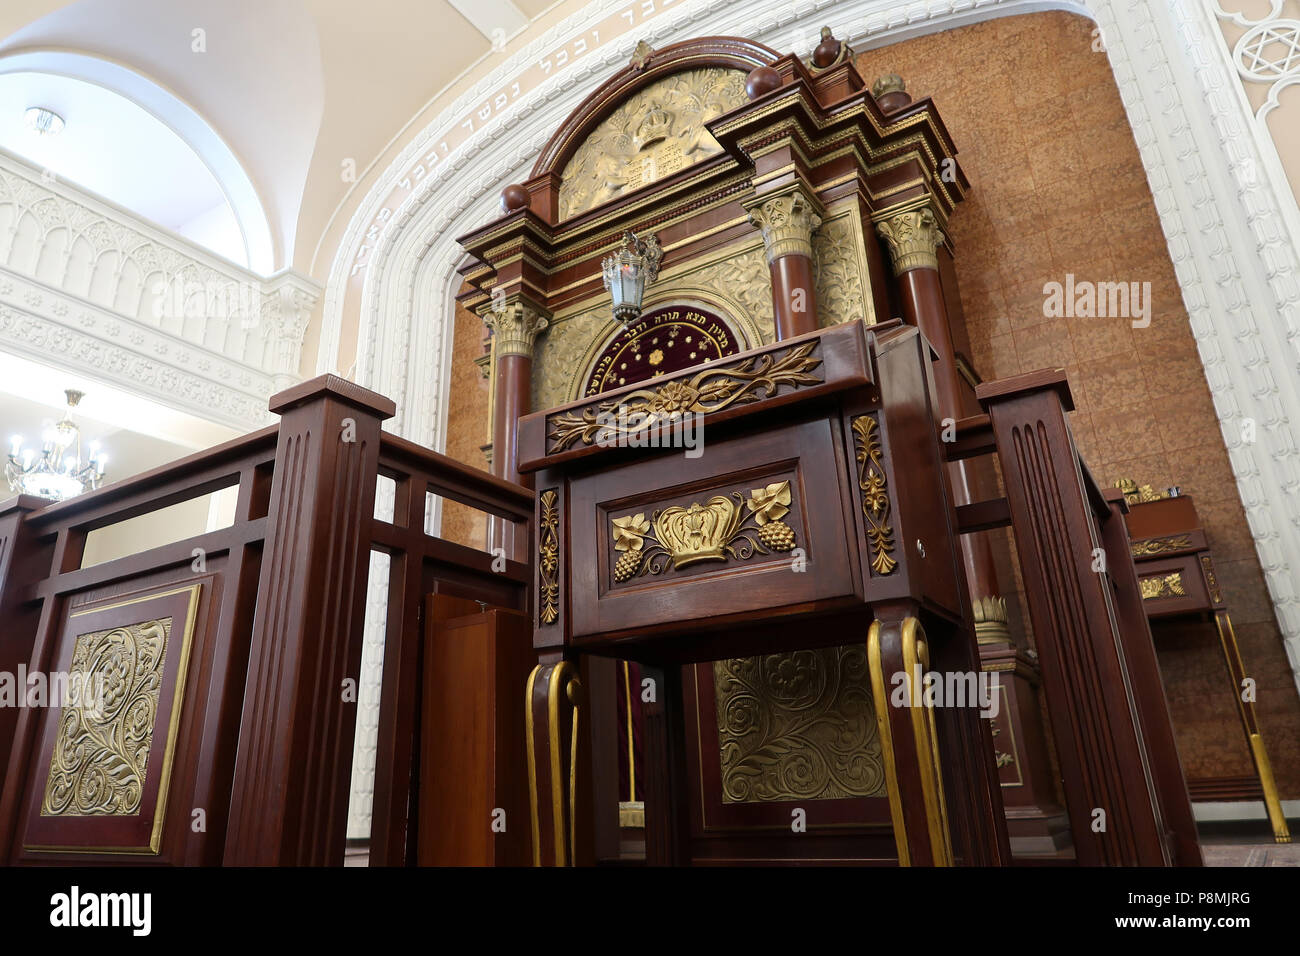 The Torah Ark of the Brodsky Choral Synagogue built in the Romanesque Revival style in Kiev capital of Ukraine Stock Photo